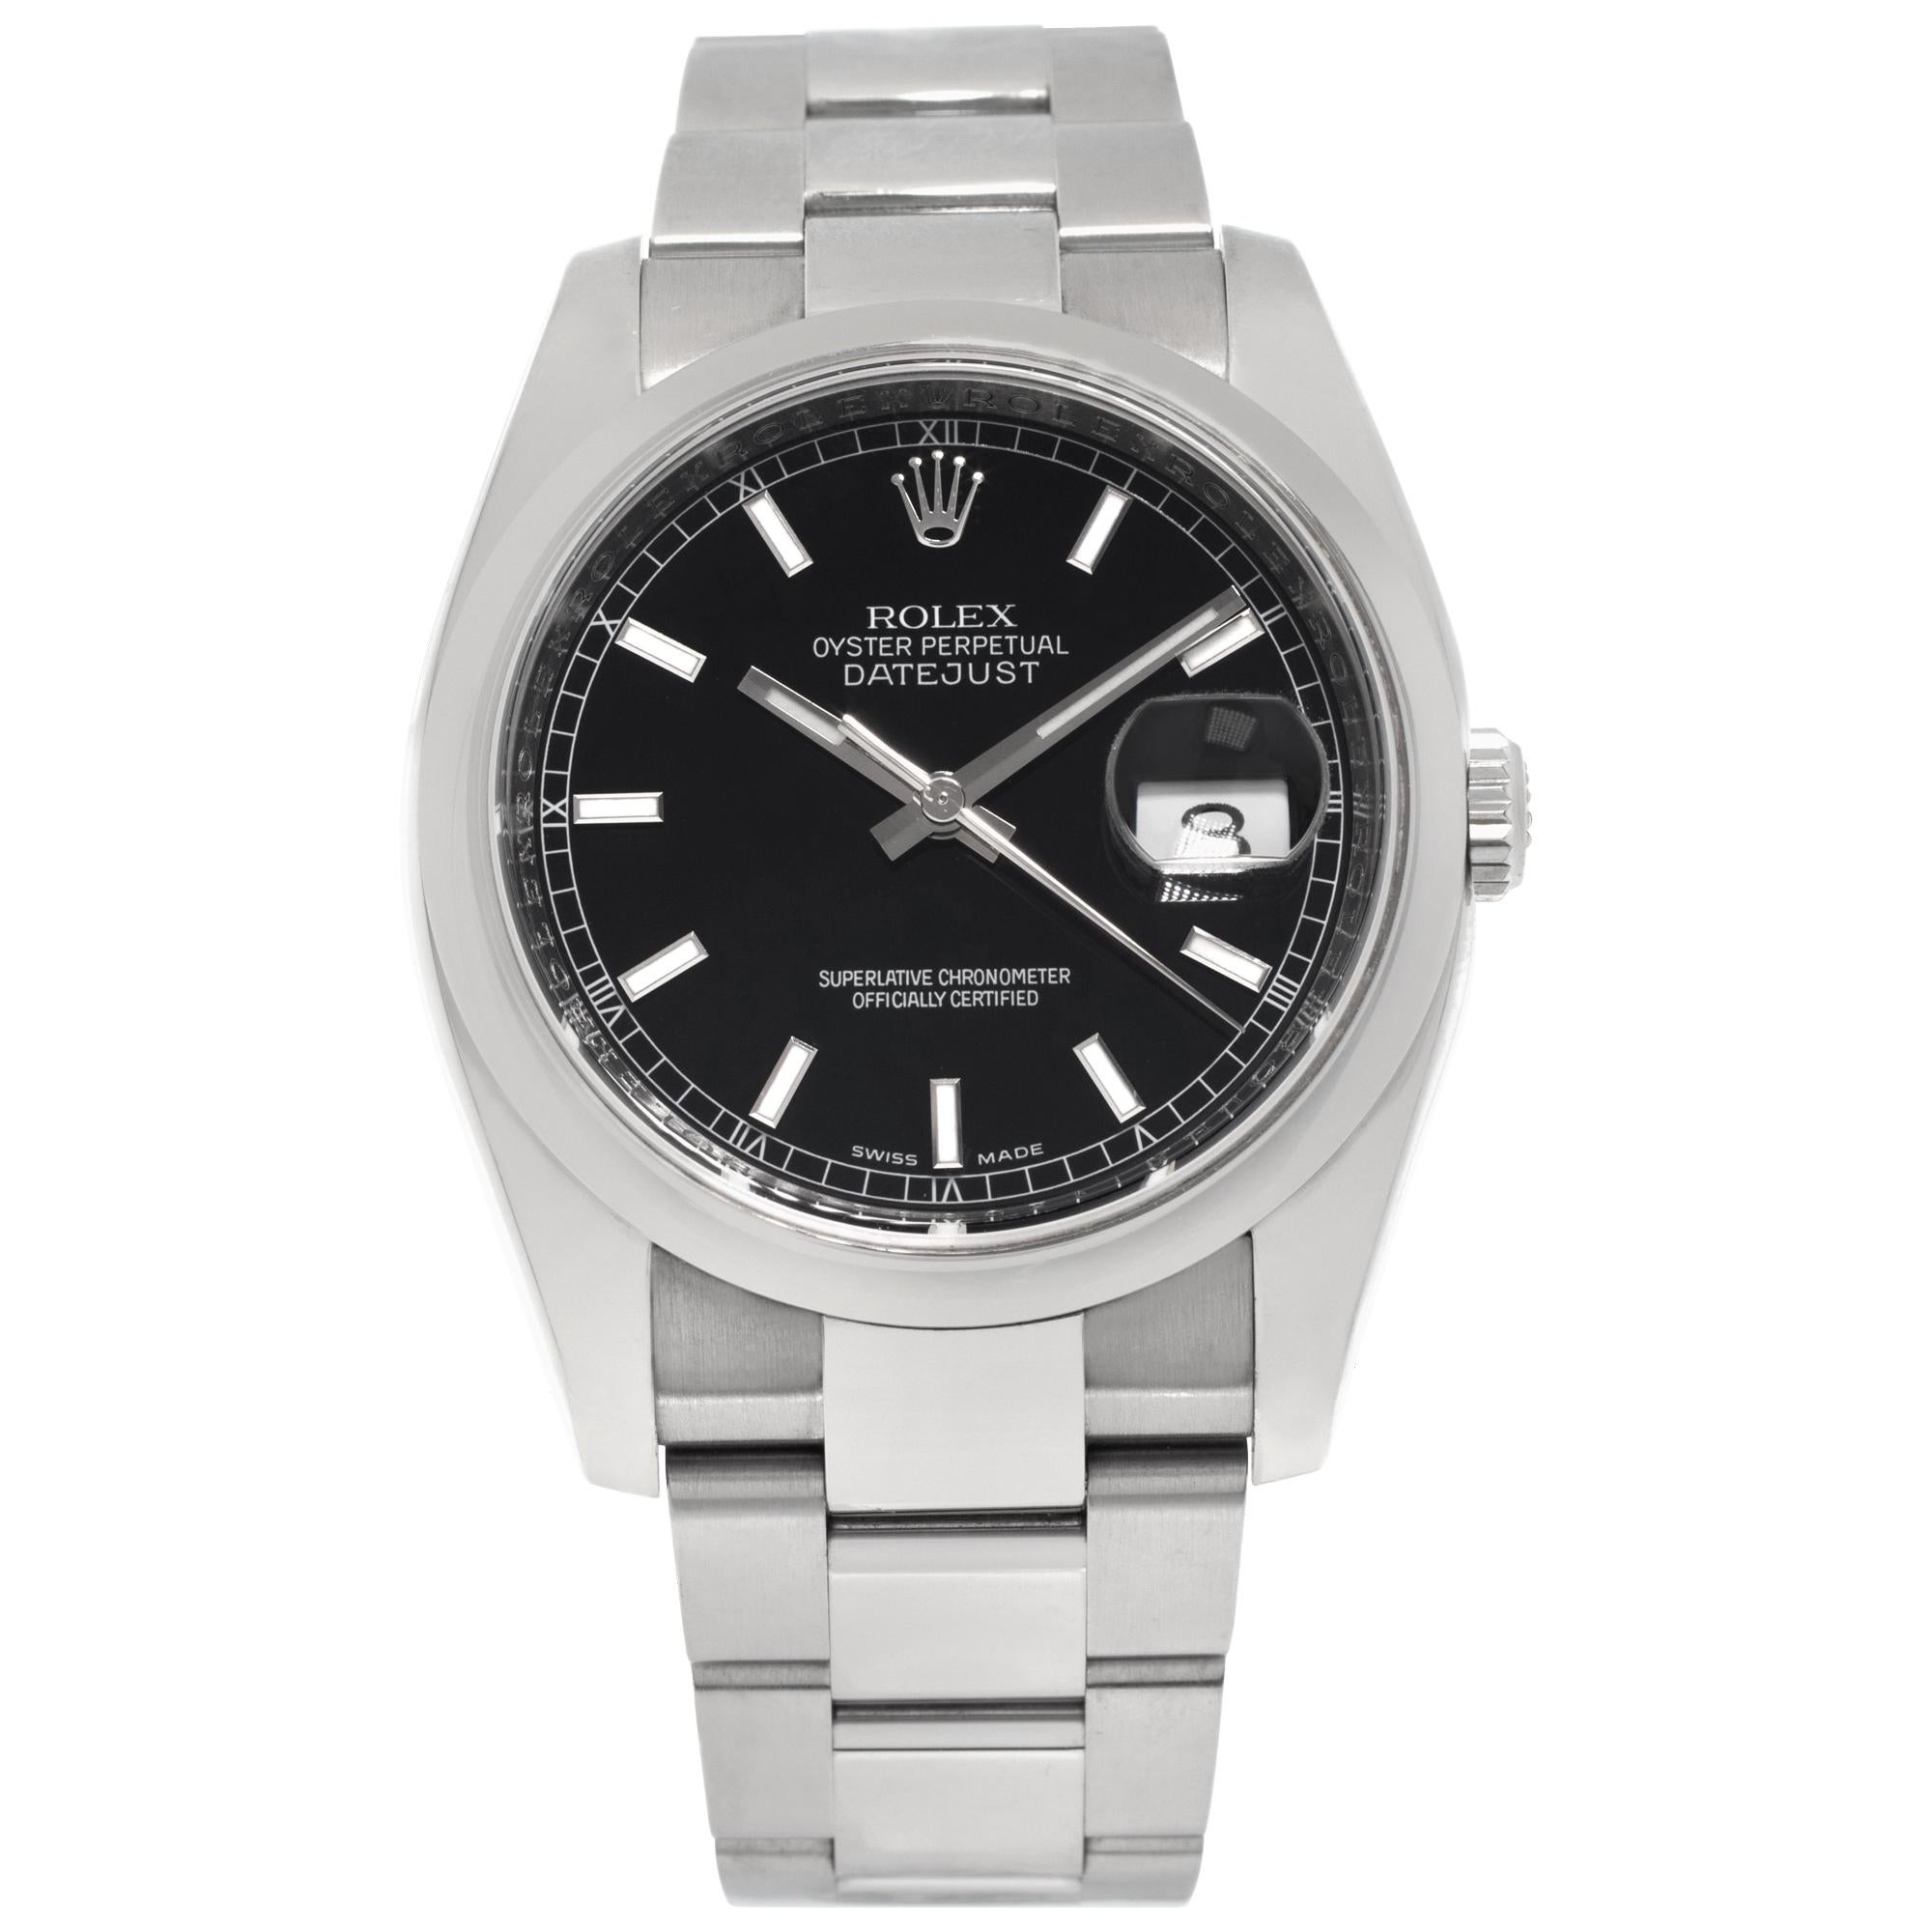 Rolex Datejust 116200 in Stainless Steel with a Black dial 36mm Automatic watch